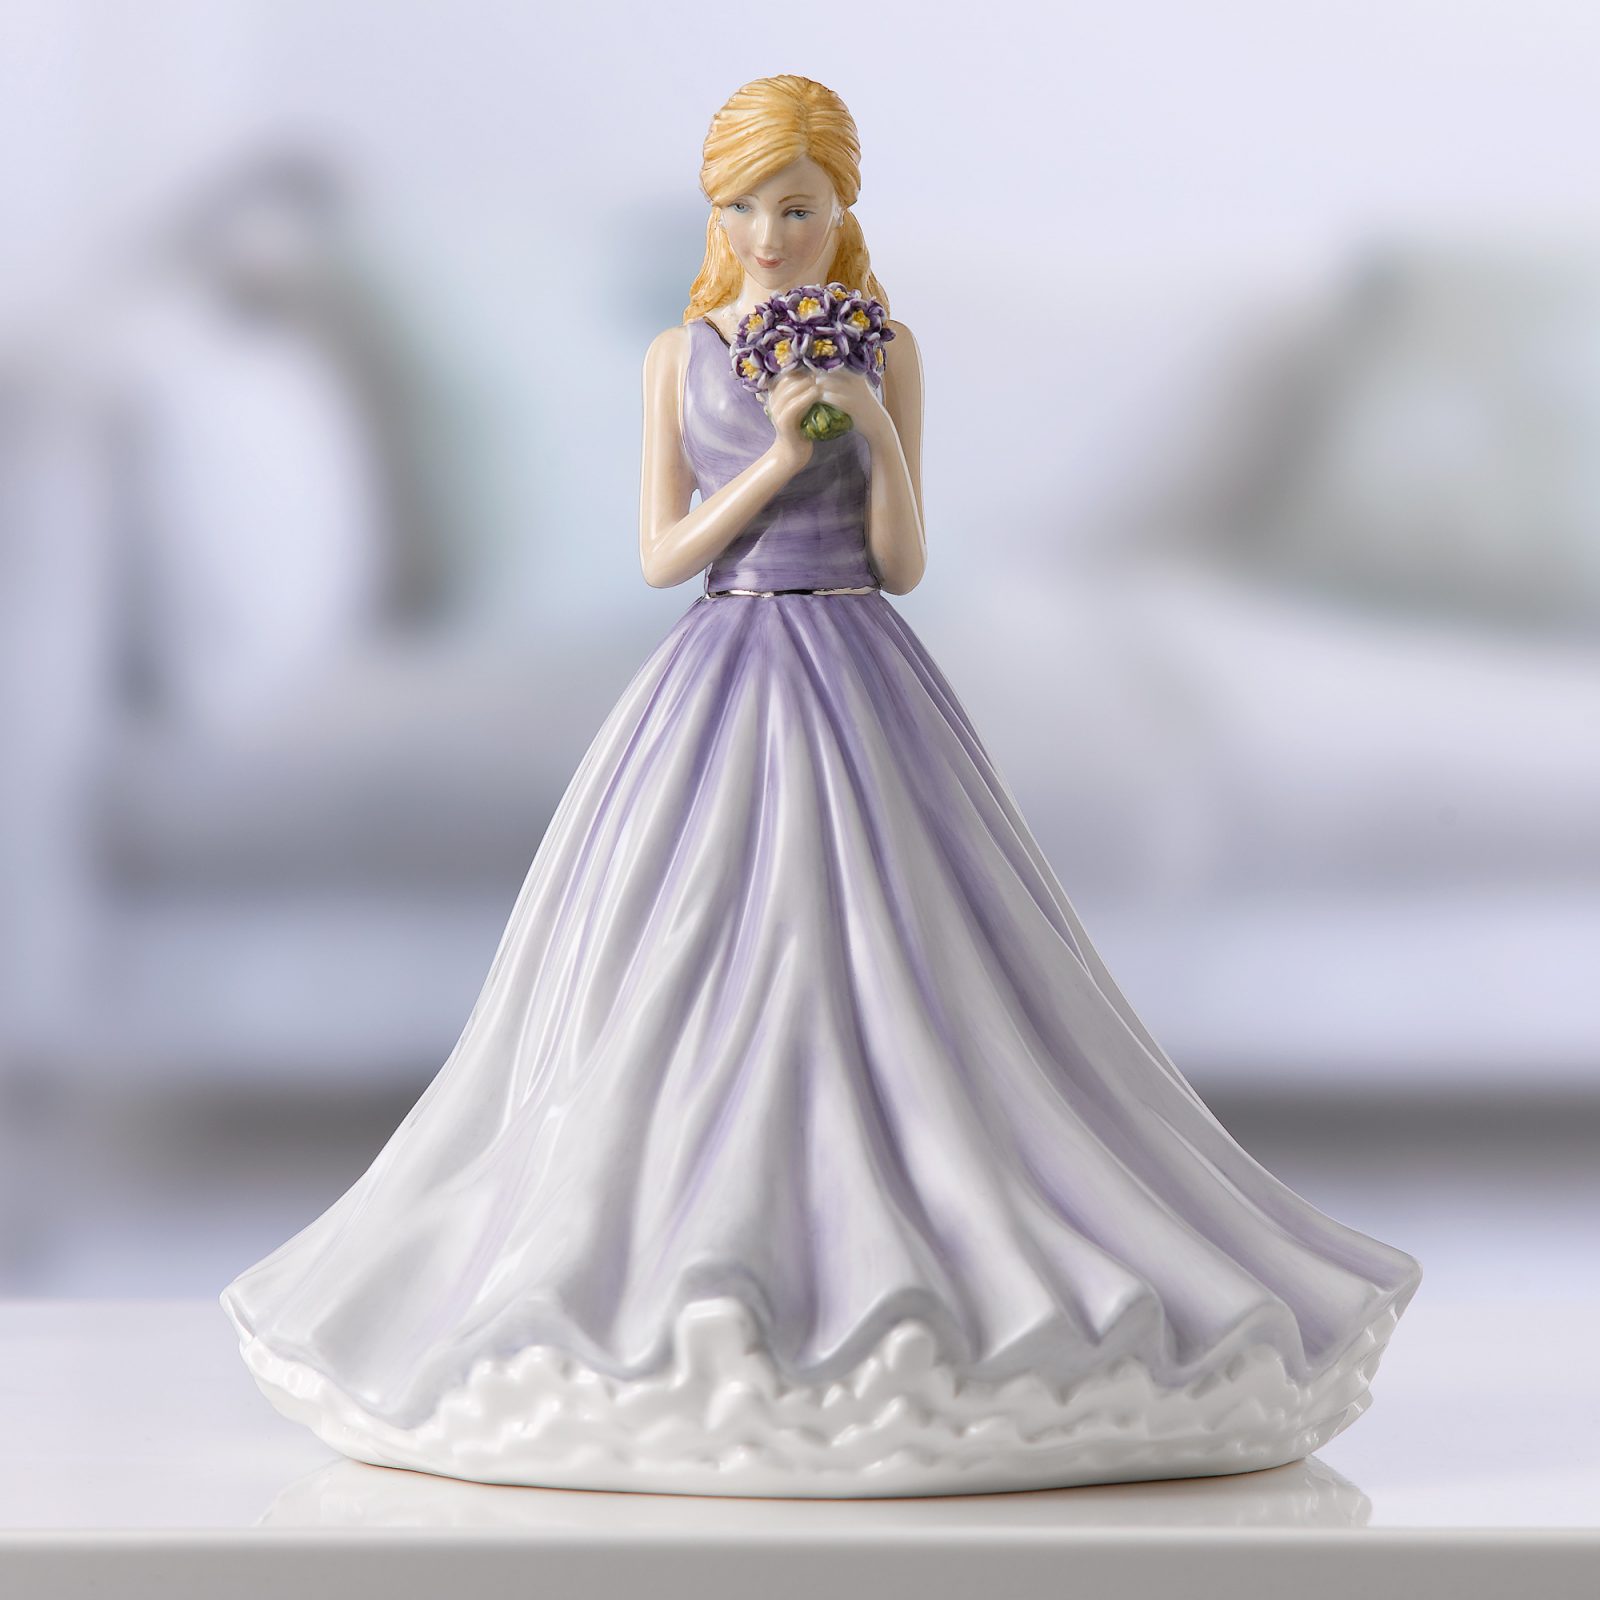 True Love (Forget-Me-Not) HN5838 - Royal Doulton Figurine